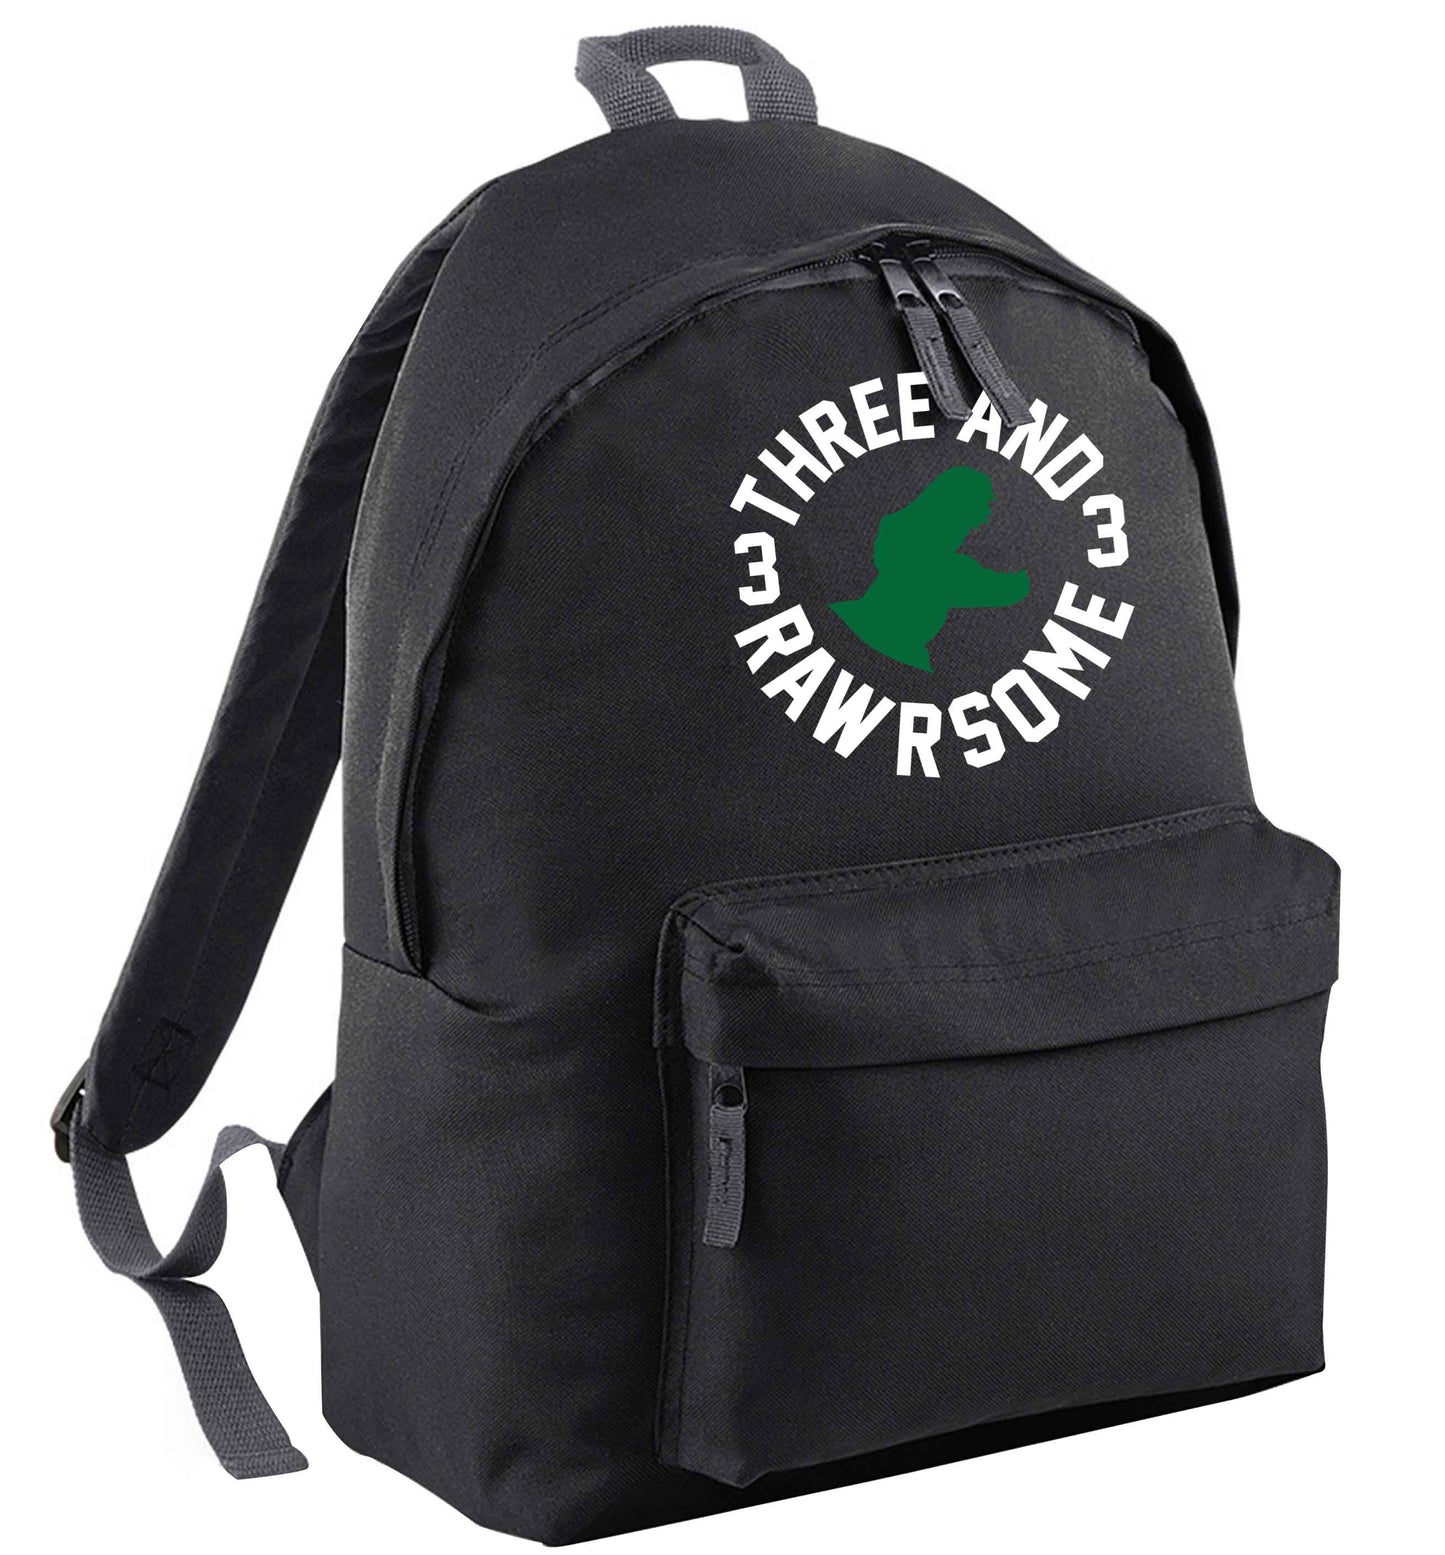 Three and rawrsome | Children's backpack